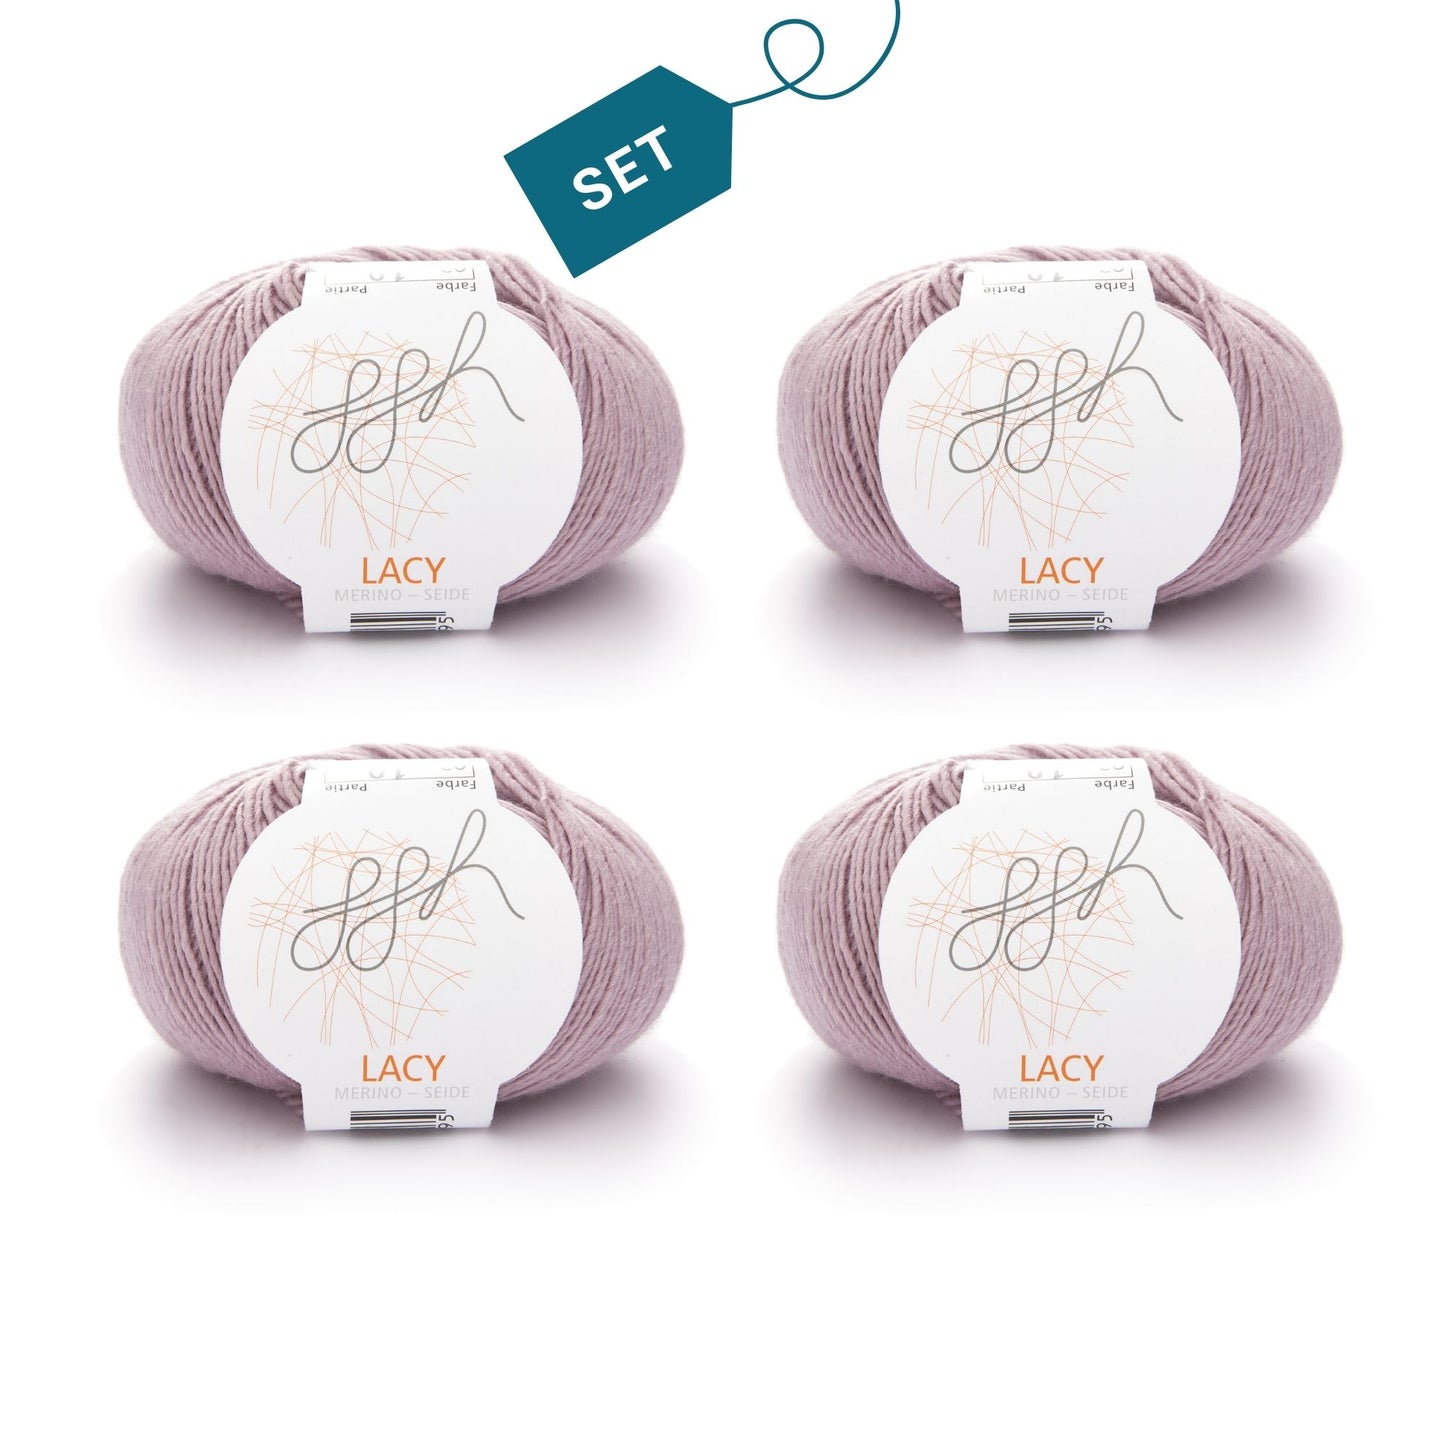 ggh Lacy | Set of 4 x 25g (total 100g) - 002 - Pink